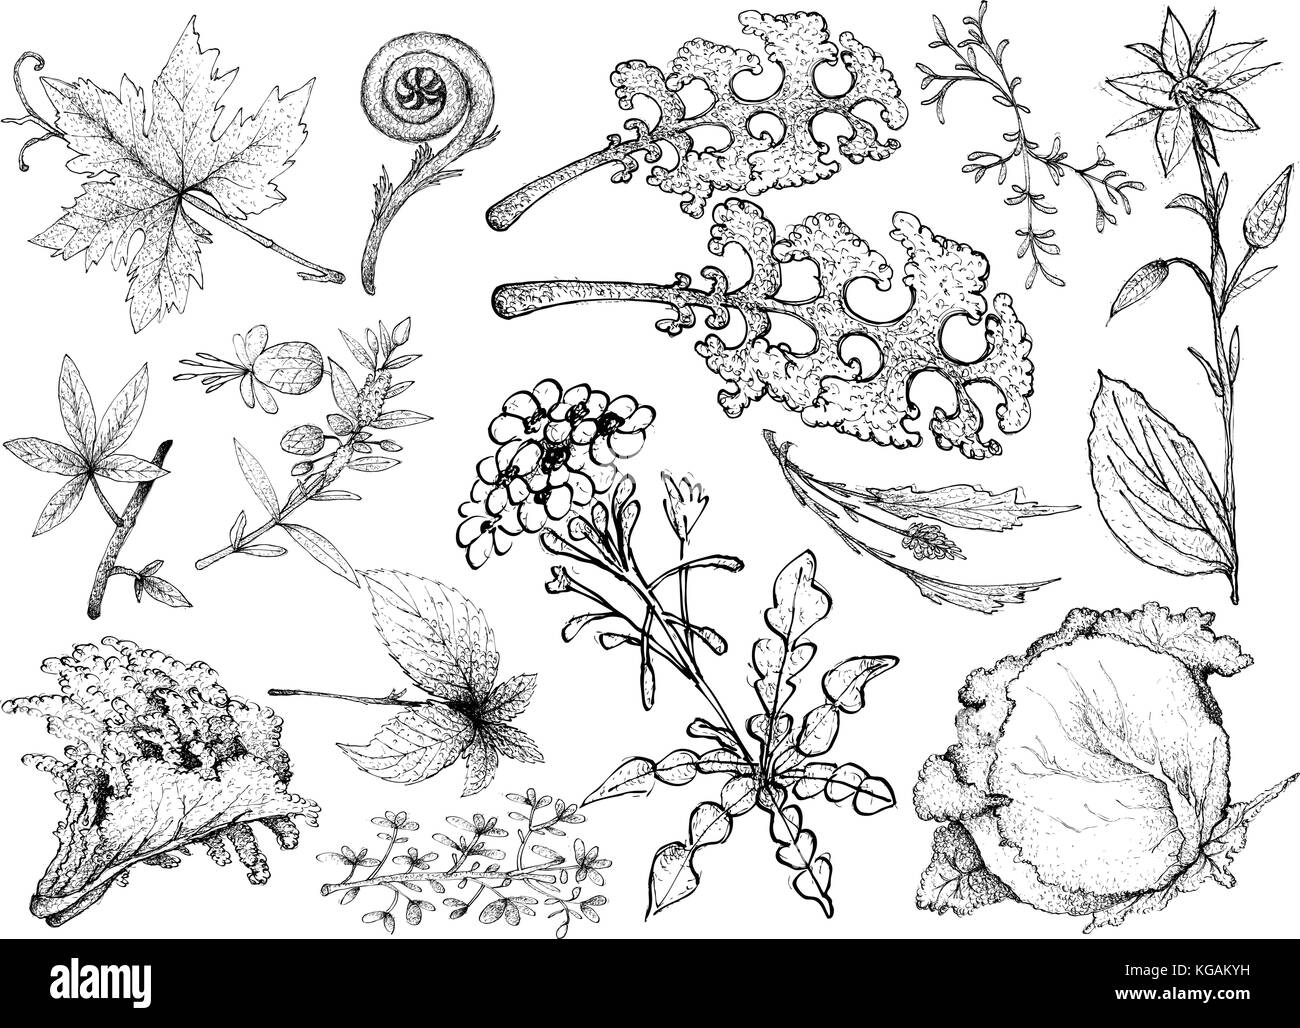 Vegetable Salad, Illustration of Hand Drawn Sketch Delicious Fresh Green Leafy and Salad Vegetable Isolated on White Background. Stock Vector